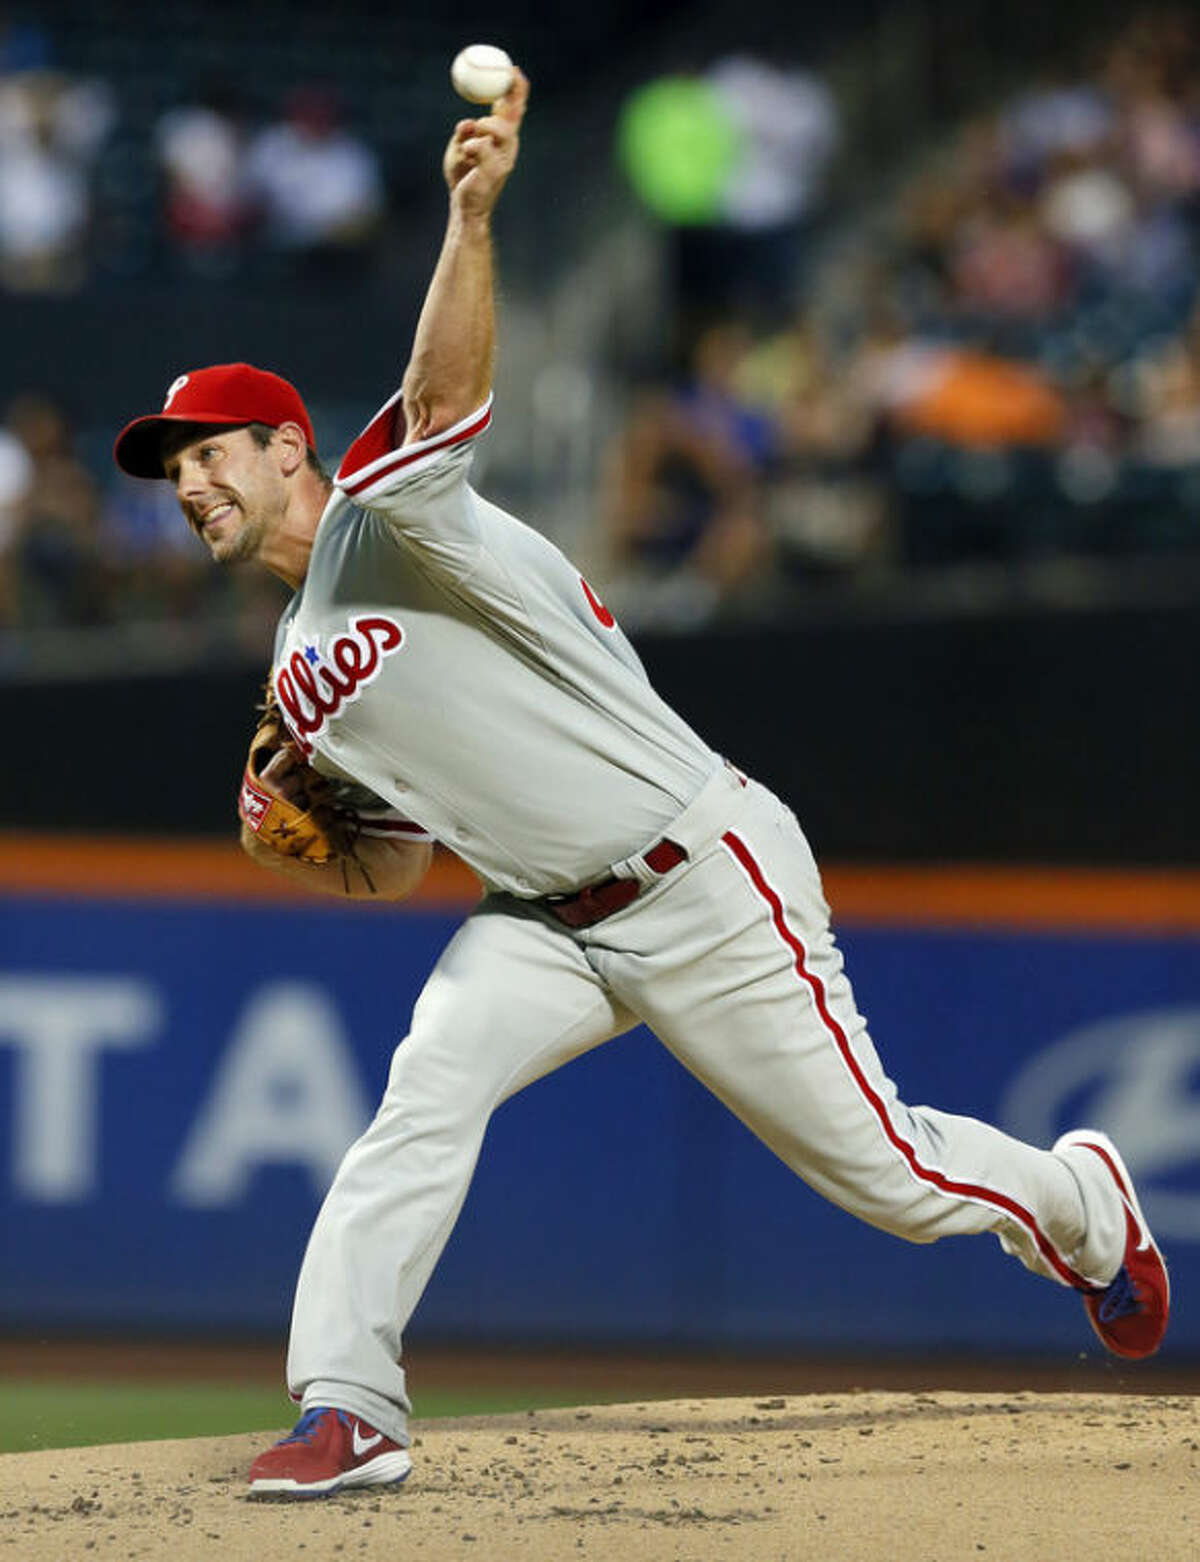 Philadelphia Phillies starting pitcher Cliff Lee (33) throws in the first inning of a baseball game against the New York Mets at Citi Field, Monday, Aug. 26, 2013, in New York. (AP Photo/Paul J. Bereswill)